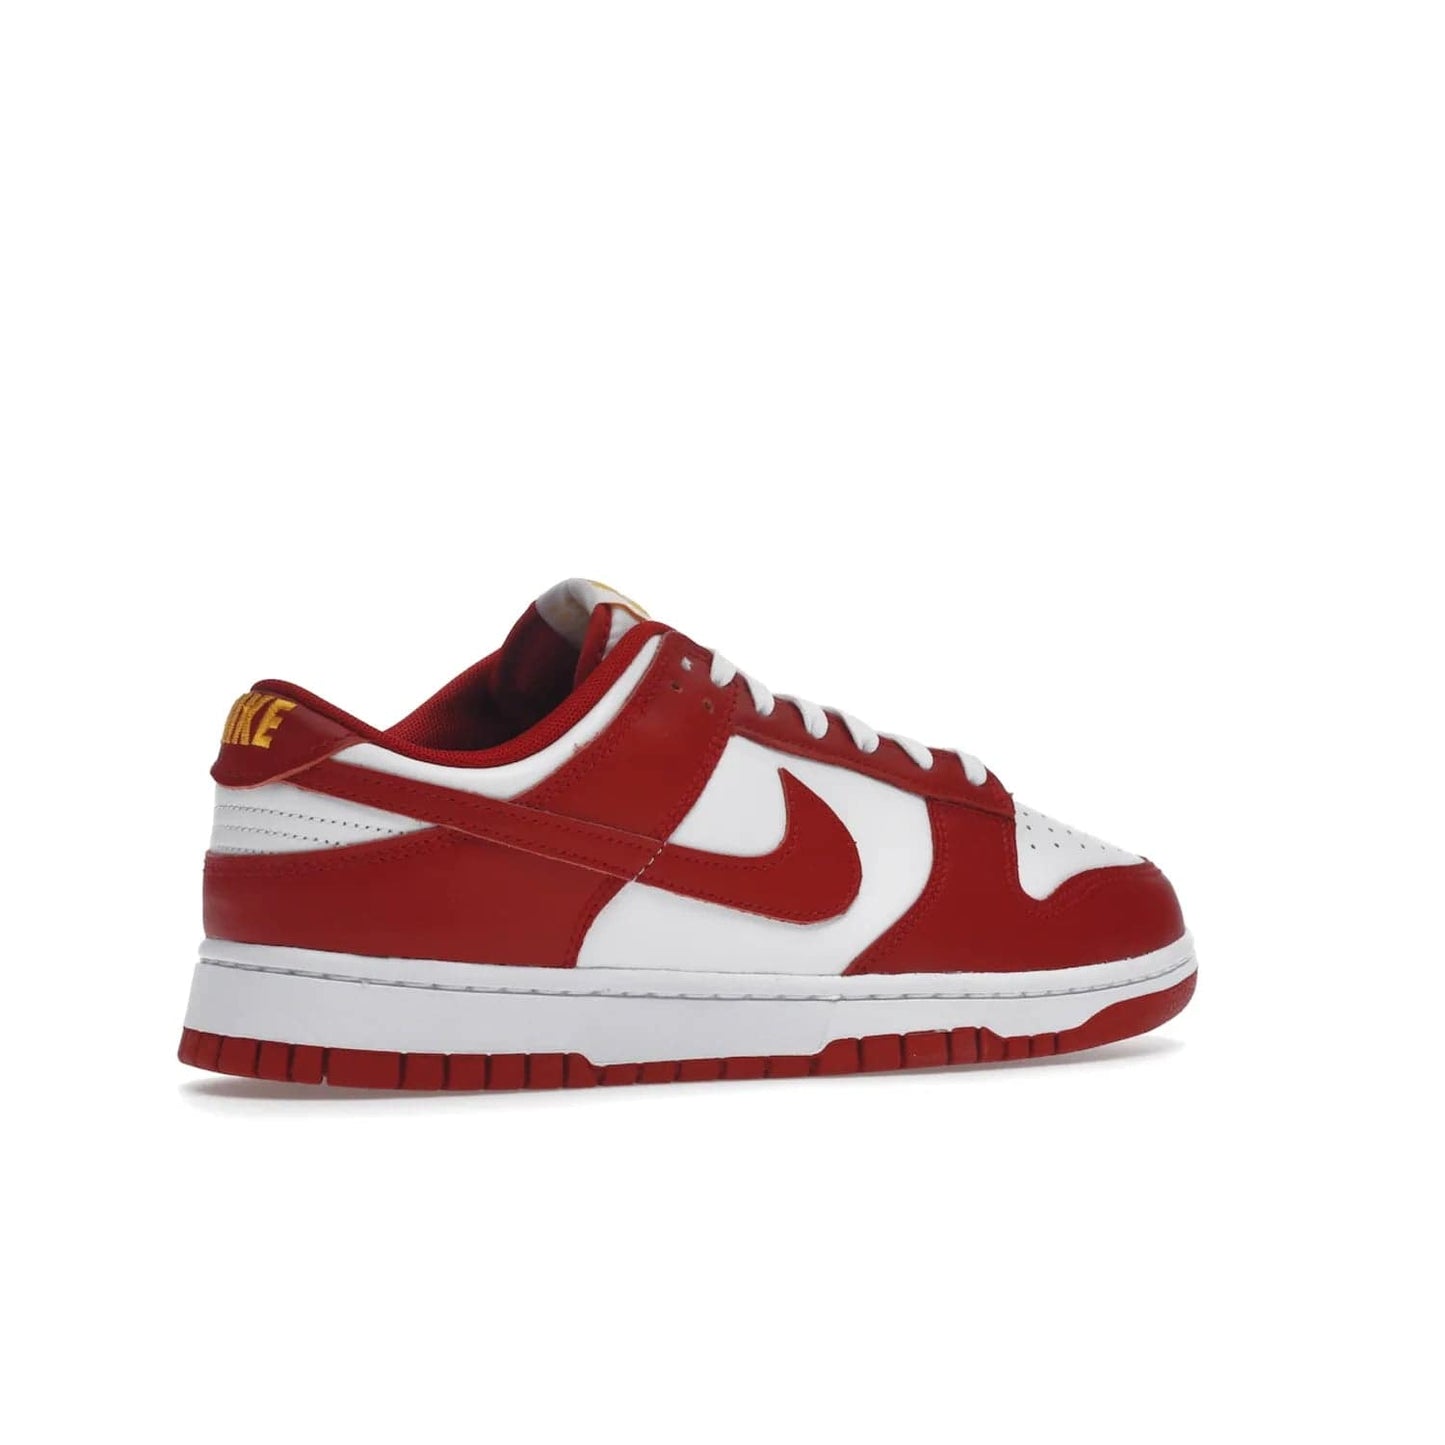 Nike Dunk Low USC - Image 34 - Only at www.BallersClubKickz.com - The Nike Dunk Low USC DD1391-602 colorway captures the eye of University of Southern California fans. Crafted with leather and rubber upper and outsole, this stylish sneaker features a white, gym red, and yellow colorway. With yellow Nike branding, white perforated vamp, and red suede Swoosh, this sneaker turns heads. Get the classic Nike Dunk Low USC releasing on November 9th, 2022.